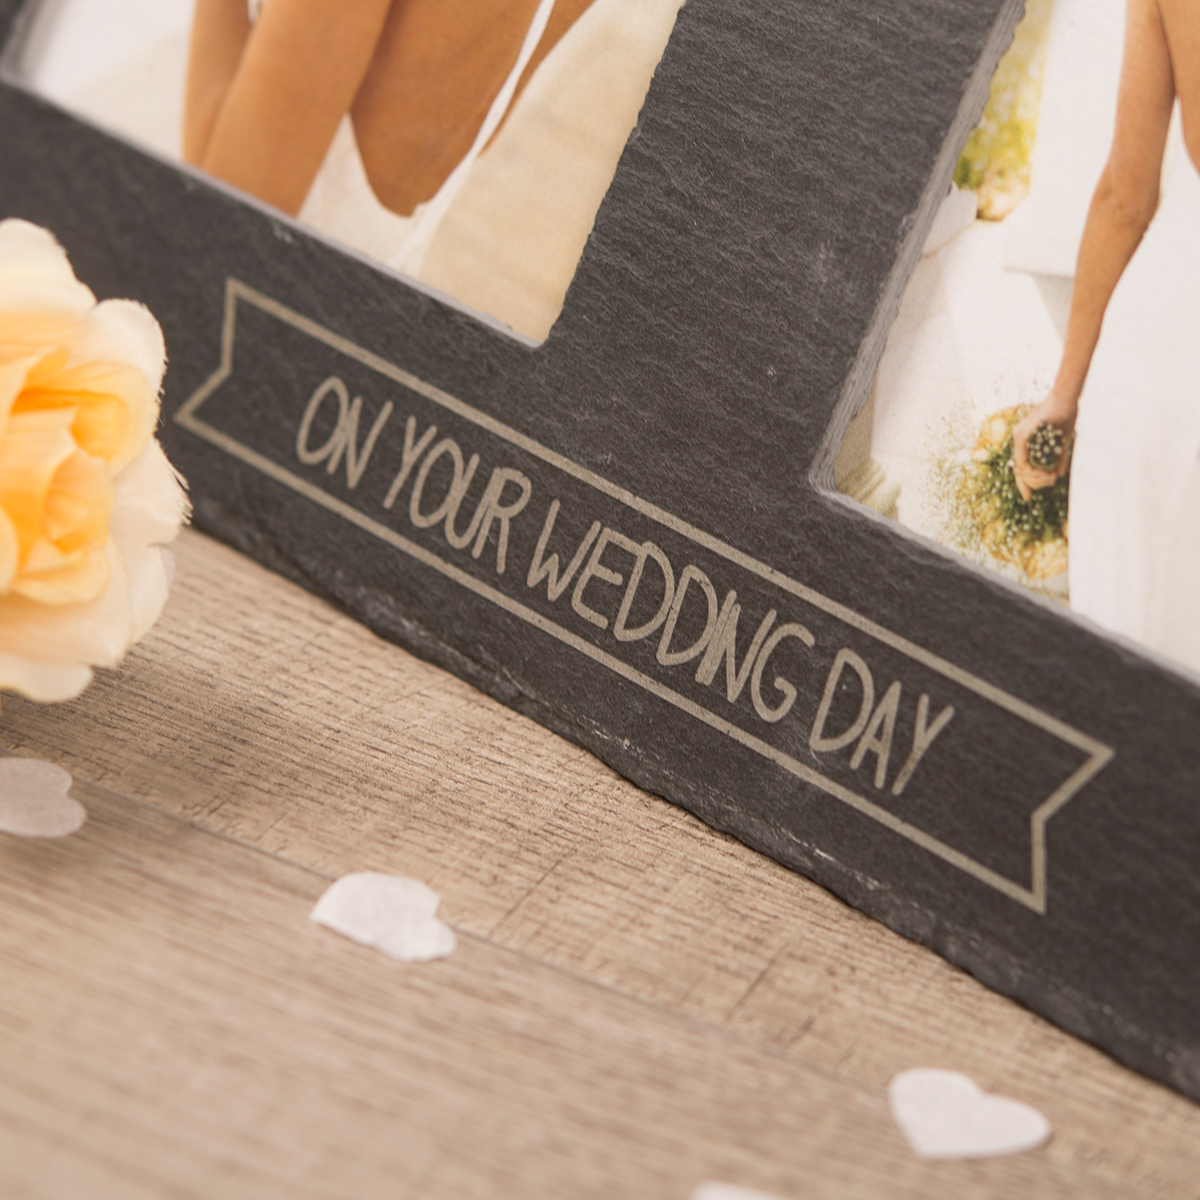 Engraved Double Slate Photo Frame - On Your Wedding Day